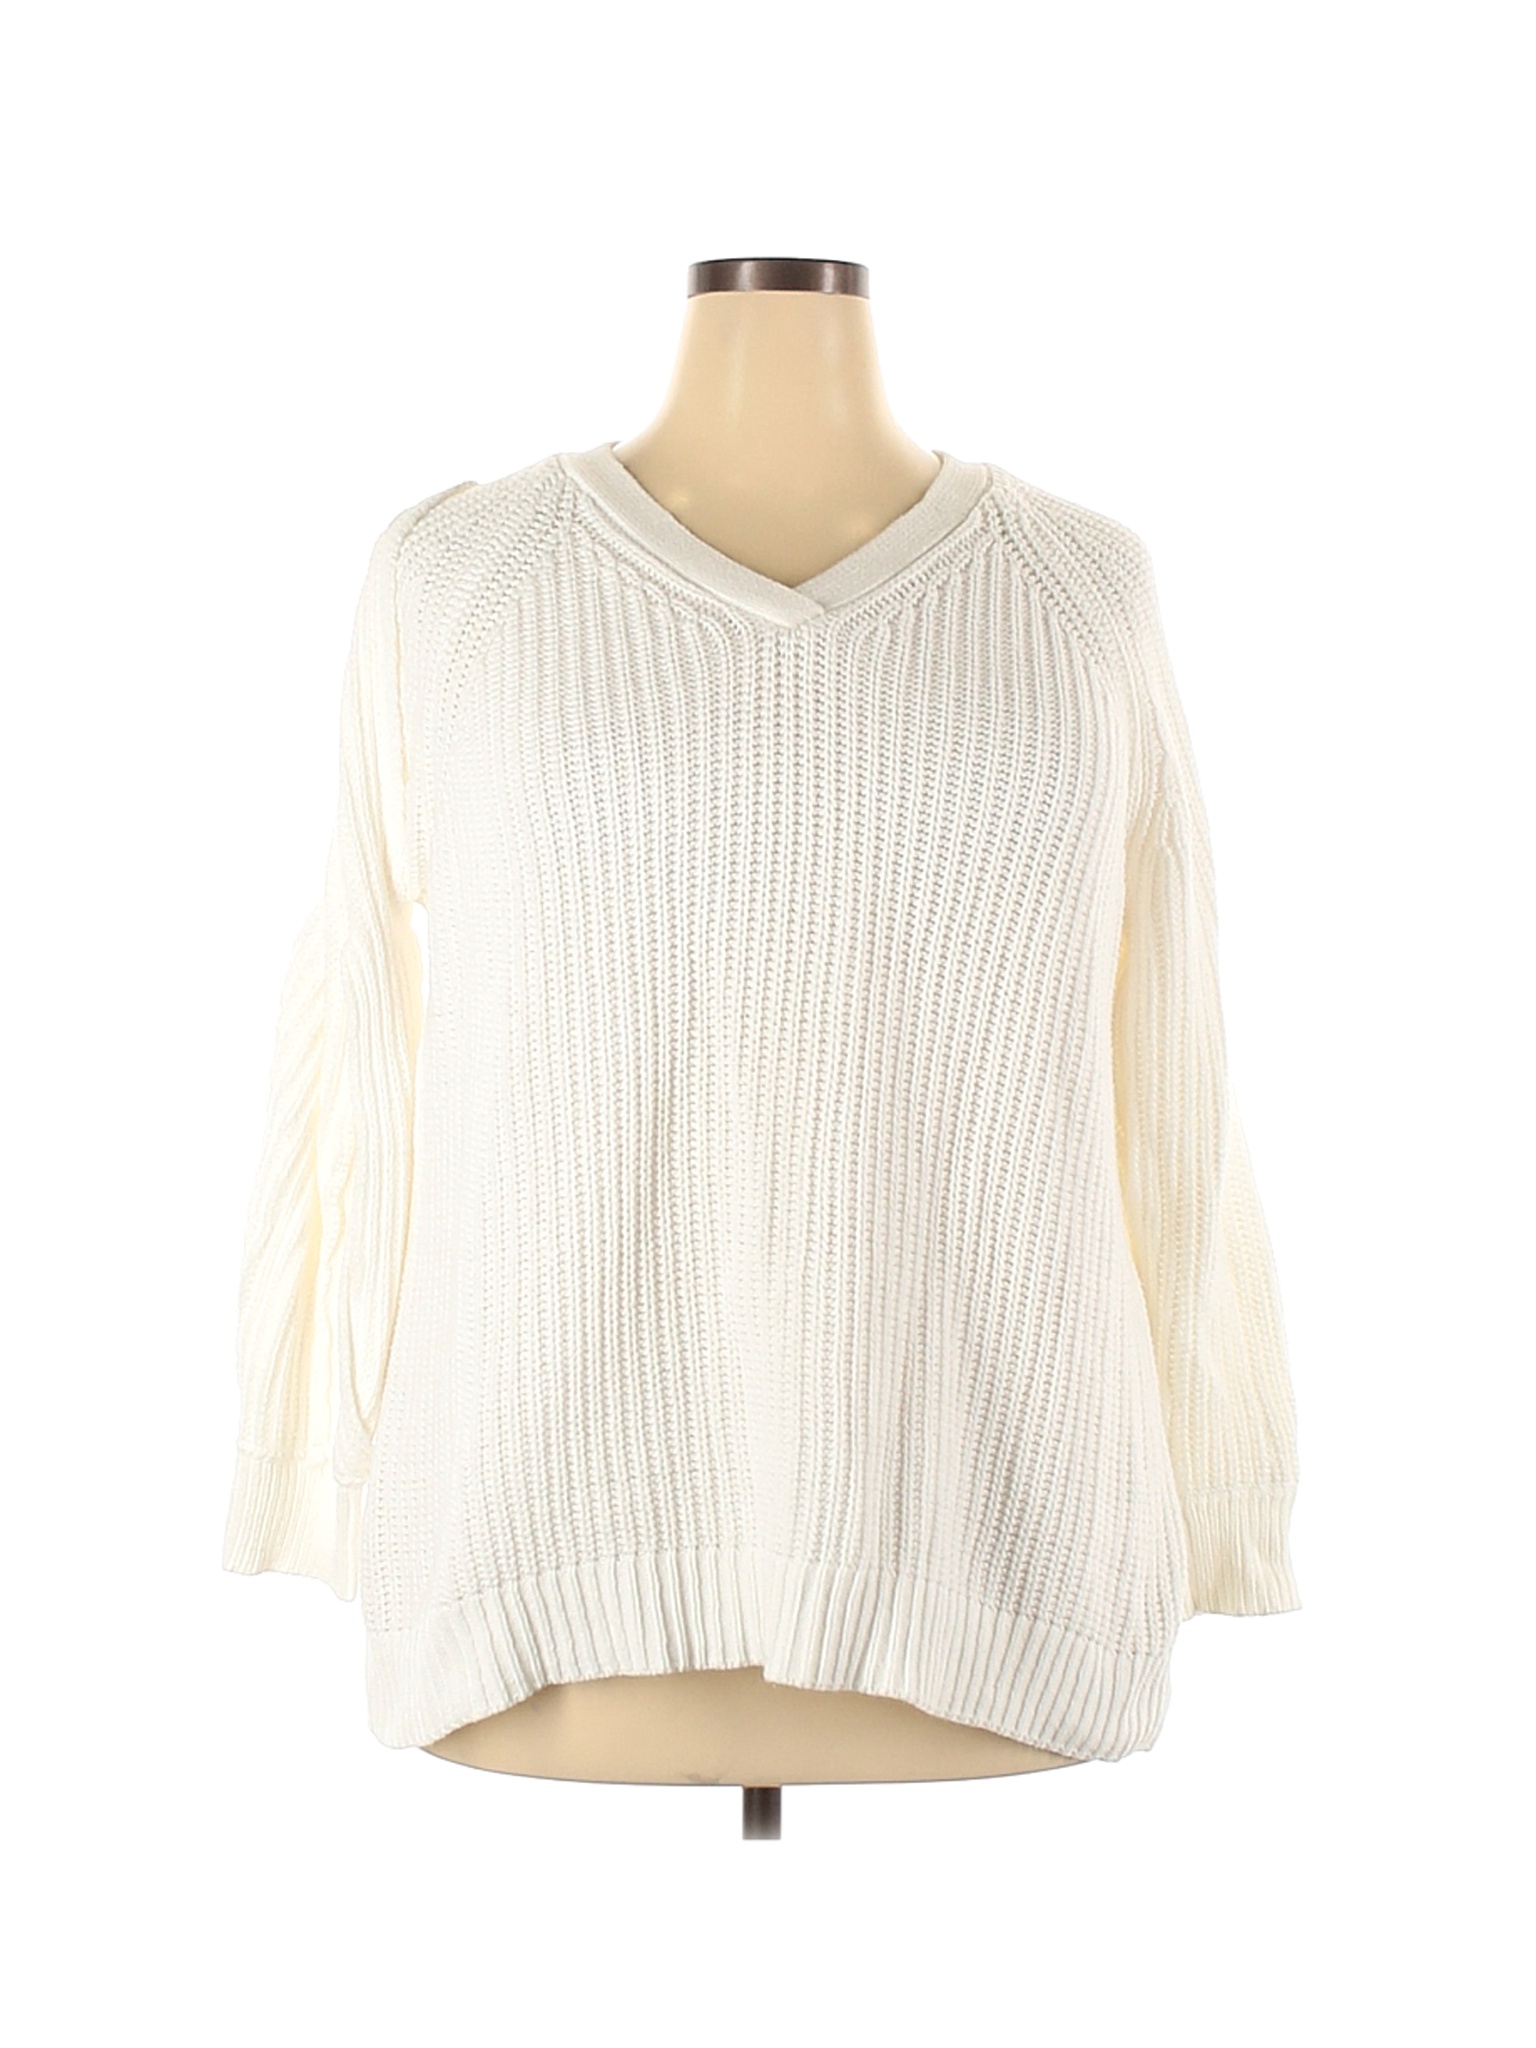 Lane Bryant Solid Ivory White Pullover Sweater Size 18 - 20 Plus (Plus ...